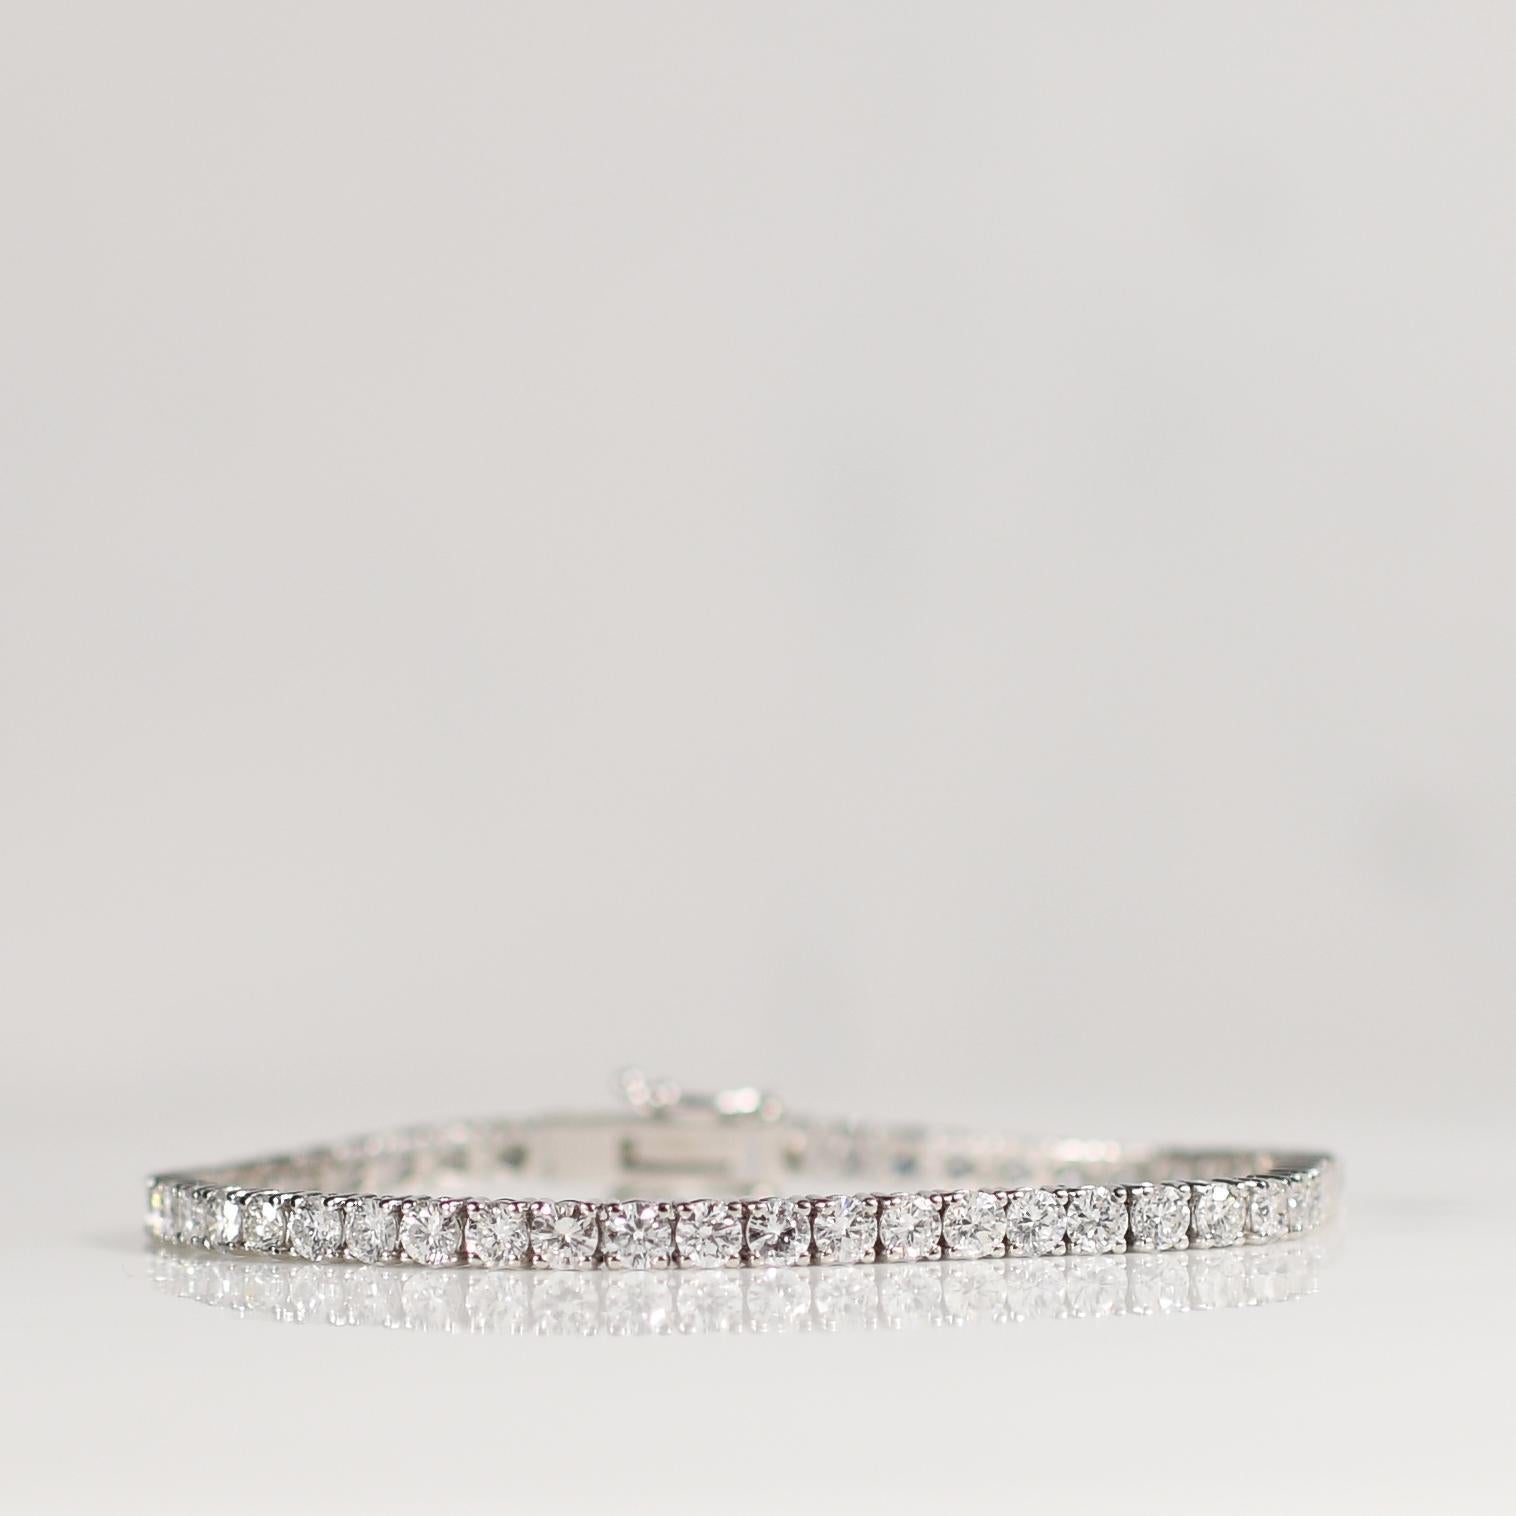 Make a stunning statement with this exquisite 7.34 carat total weight round brilliant cut diamond tennis bracelet, elegantly set in gleaming 14k white gold. Featuring 51 dazzling diamonds, each expertly crafted to maximize brilliance and fire, this